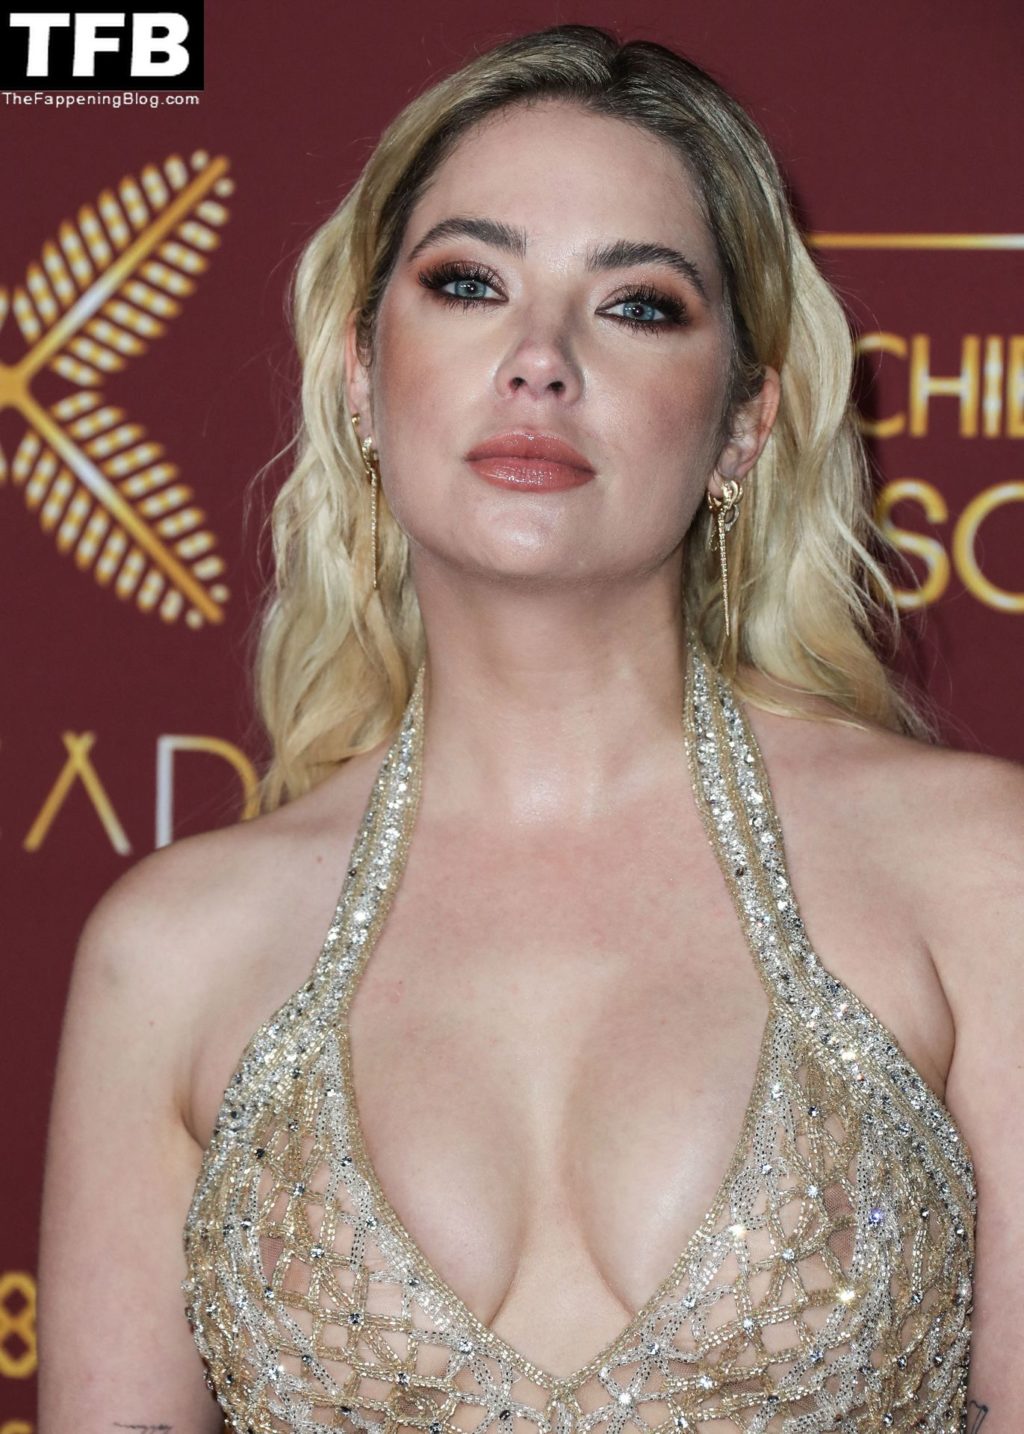 Ashley Benson Sexy The Fappening Blog 15 1024x1434 - Ashley Benson Displays Nice Cleavage at the Darren Dzienciol and Richie Akiva Oscar Party (39 Photos)